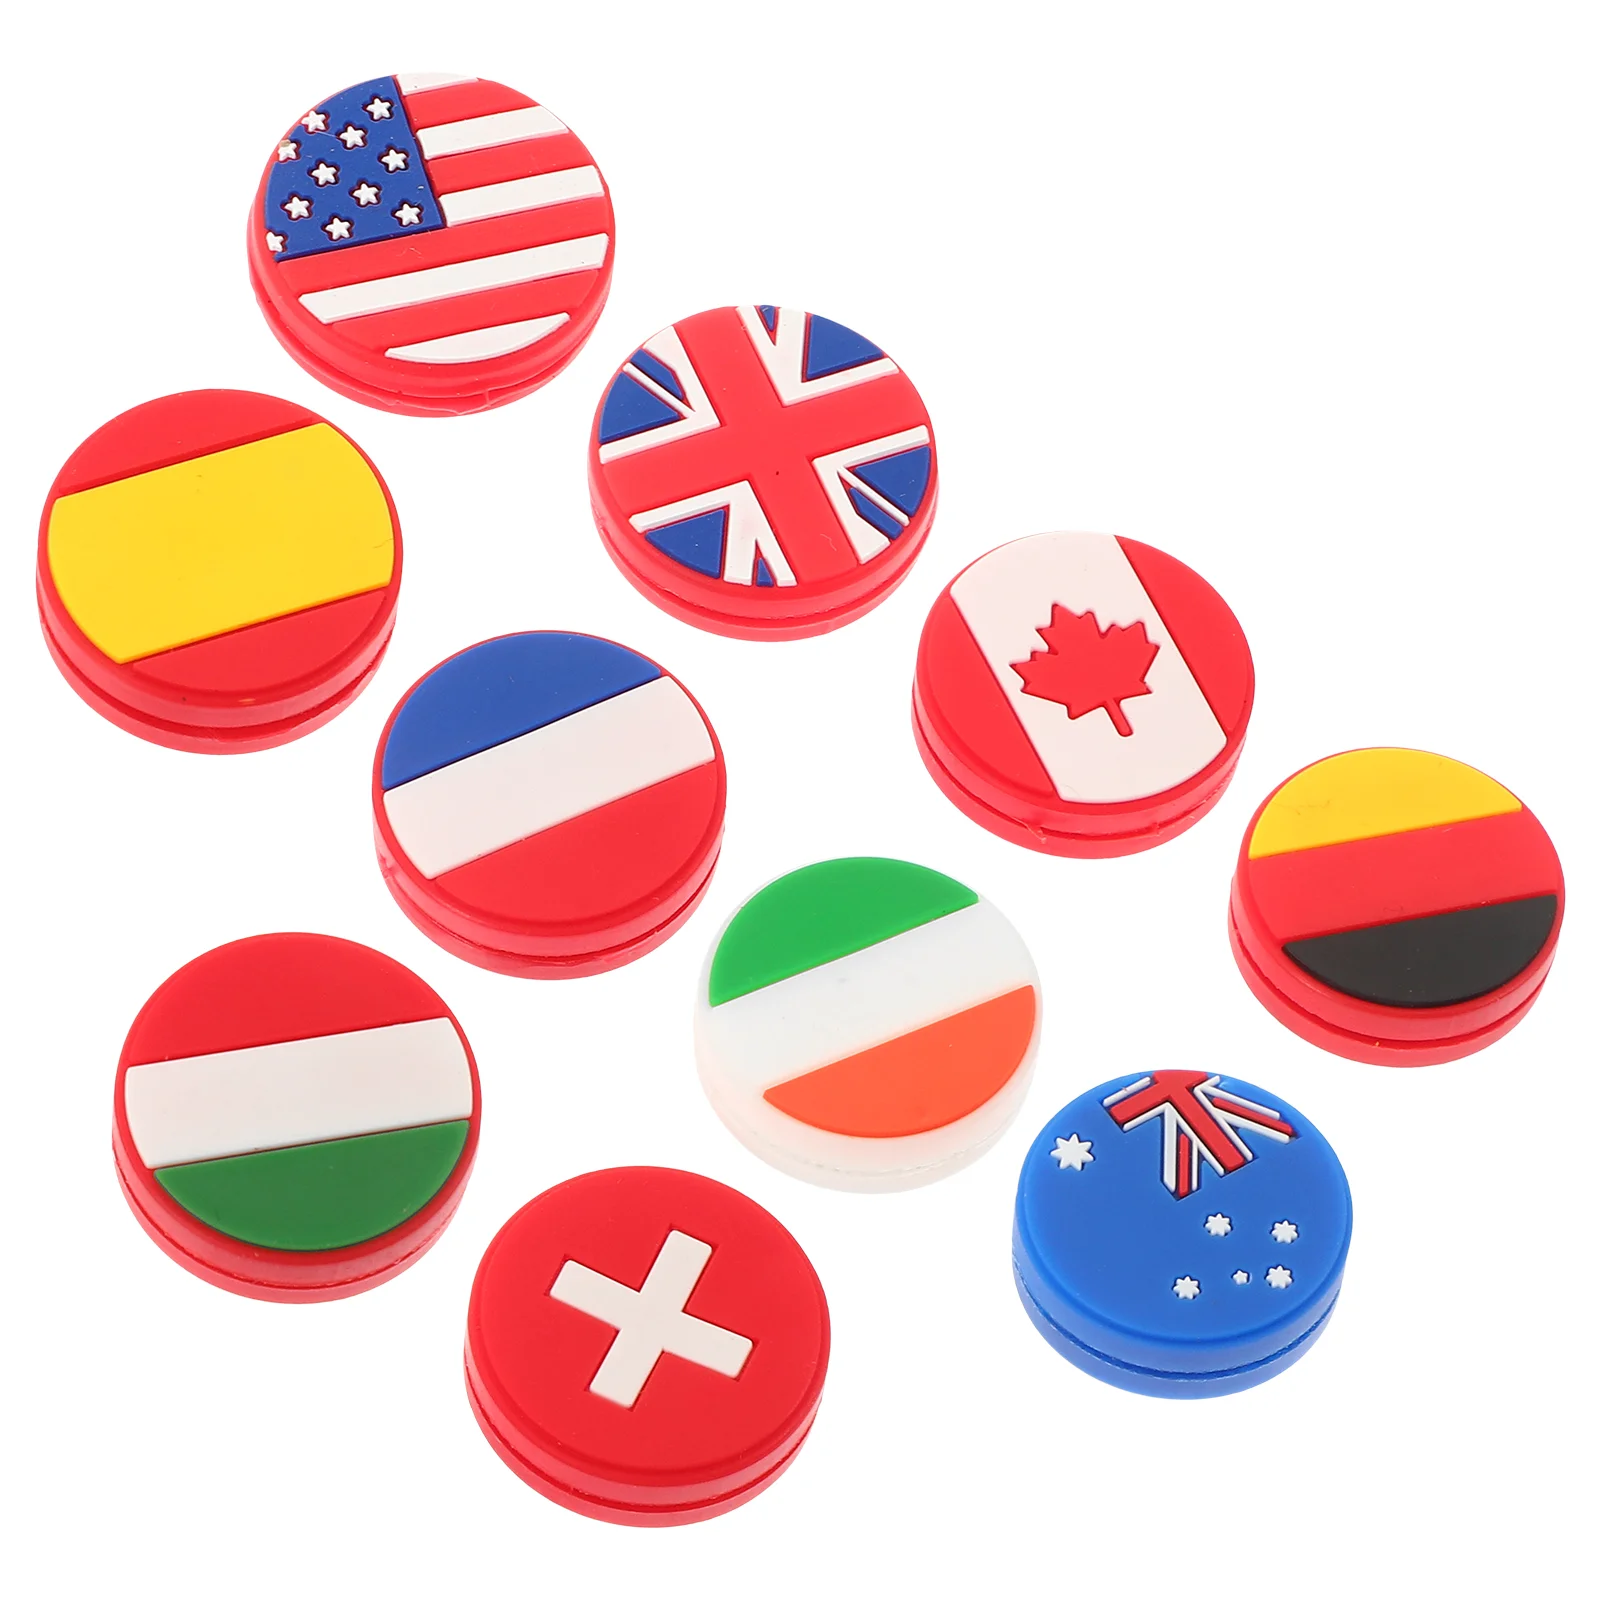 

Country Flag Shape Tennis Balls Silicone Tennis Dampeners Racket Anti Vibration Damper Tennis Accessories